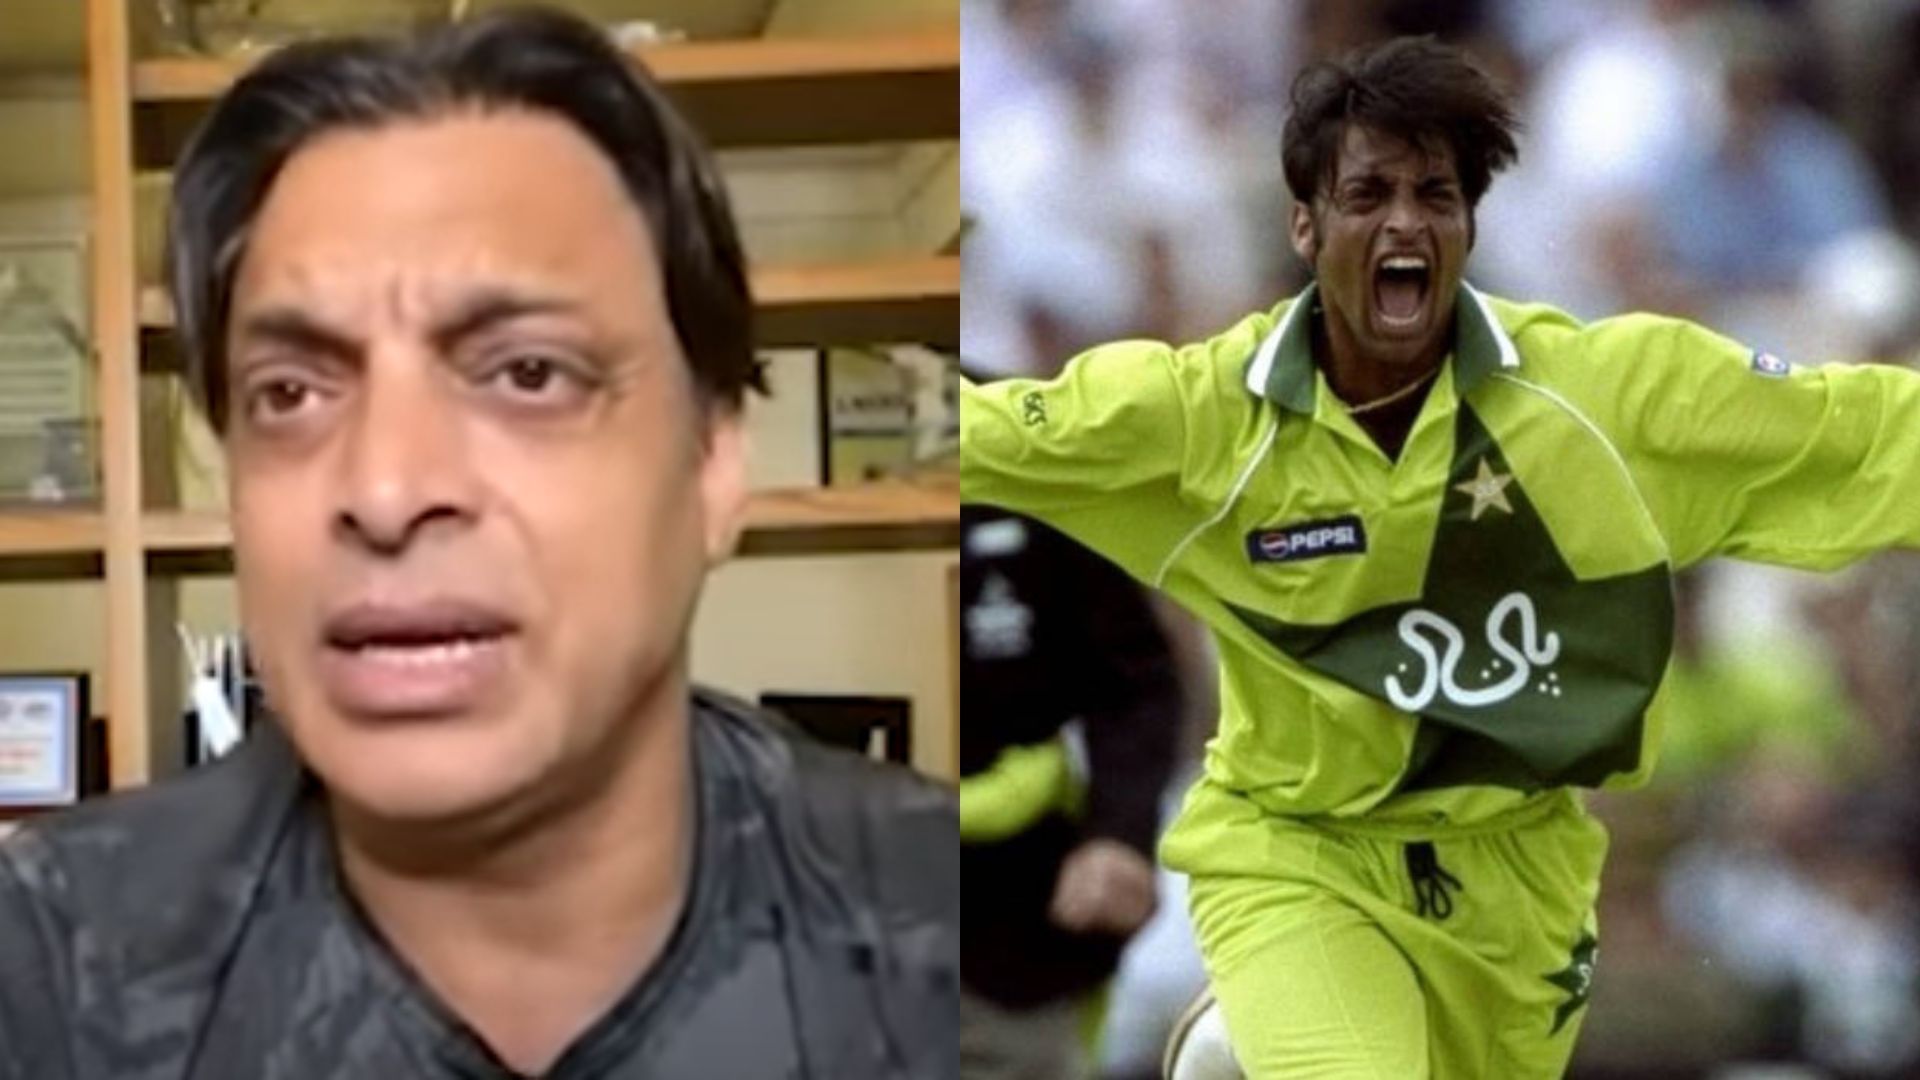 Shoaib Akhtar recalled his emotions after losing the 1999 World Cup final.